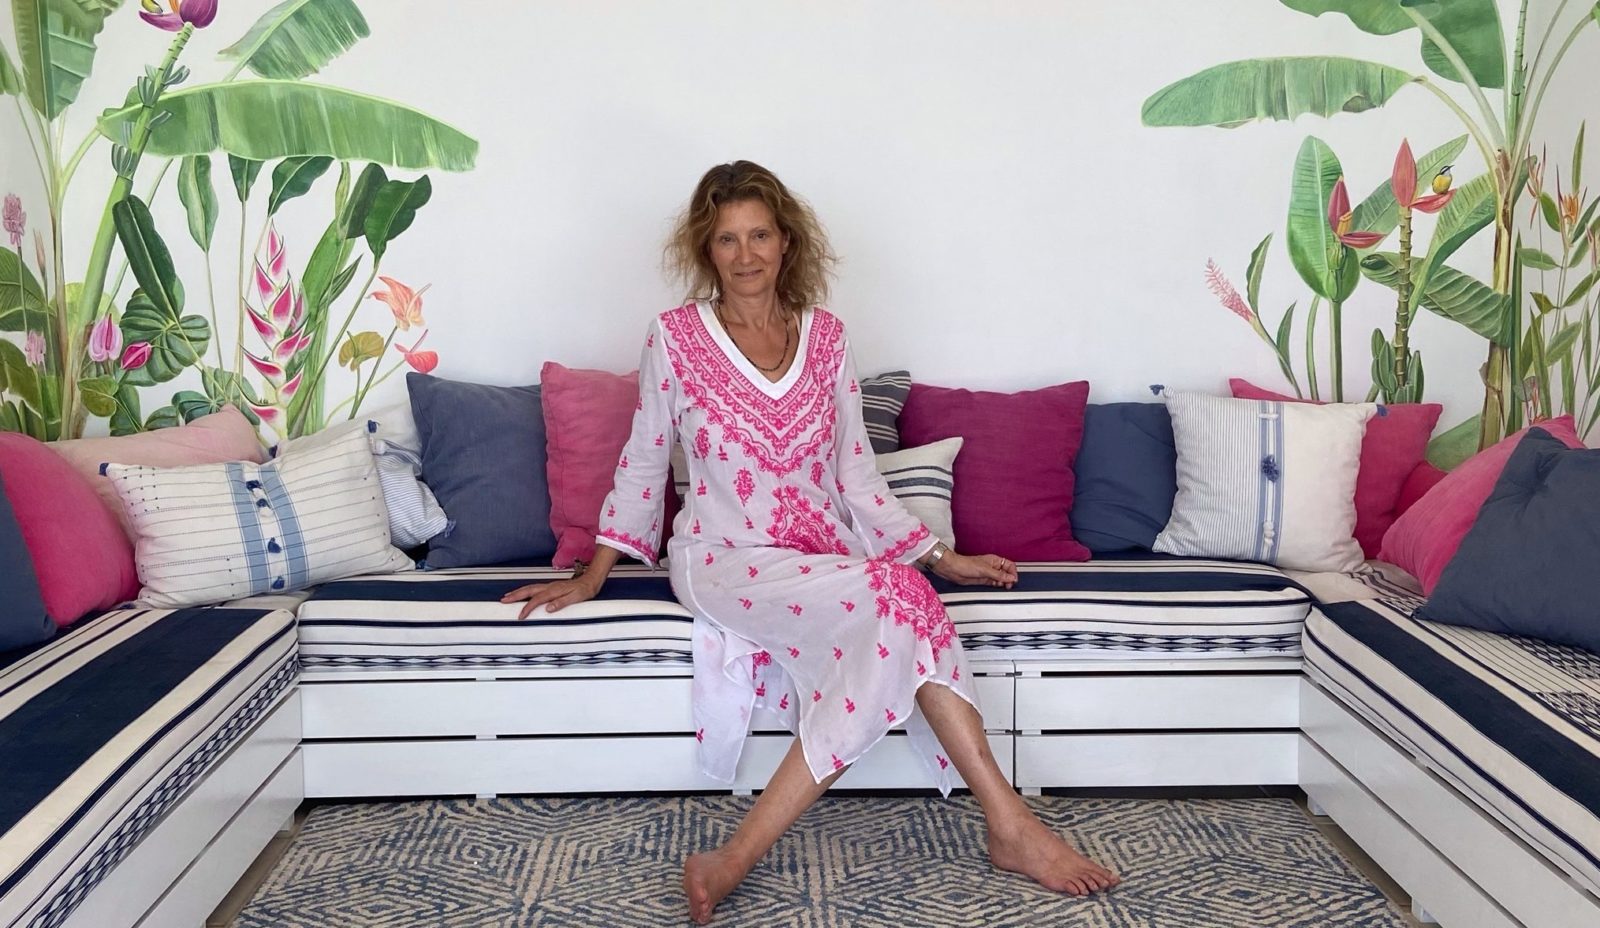 A woman in a white and pink dress sits on striped cushions in a white room decorated with colourful murals inspired by the flora and fauna in the surrounding rainforest at Cosmos St Lucia